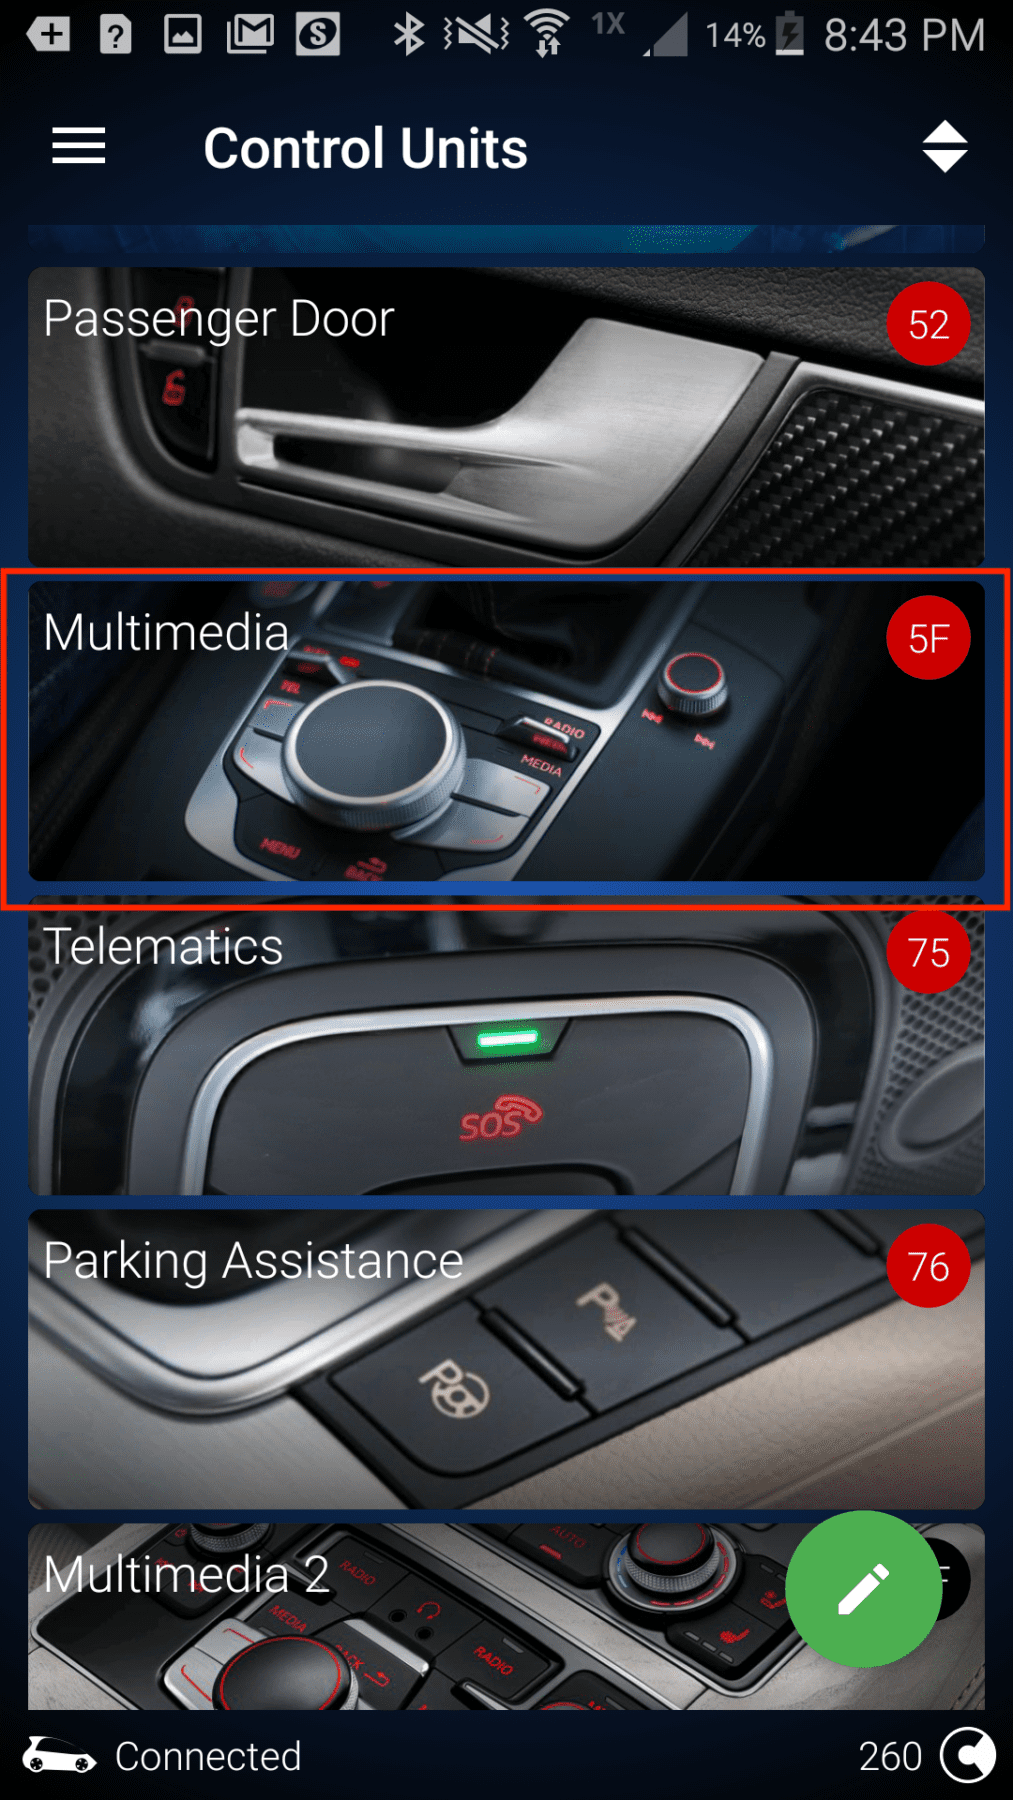 VW MK7.1 OBDEleven Control Units multimedia selected to program stereo signal